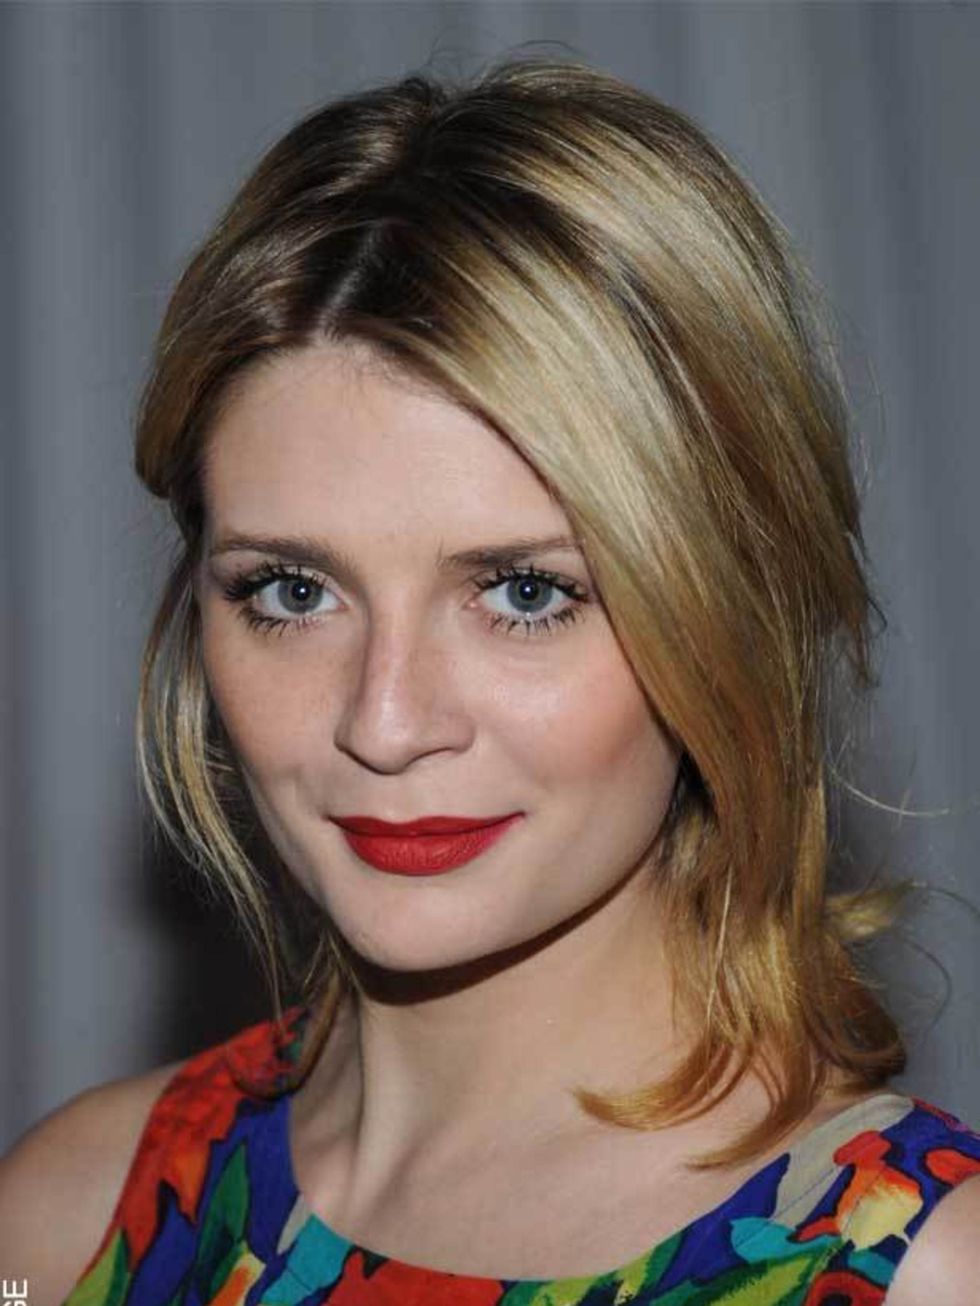 <p>Beverley Hills Fair Arrivals, November 2010</p><p><a href="http://www.elleuk.com/beauty/beauty-notes-daily/lip-service">The Lipstick Queen's tips on finding your perfect lip colour...</a></p>